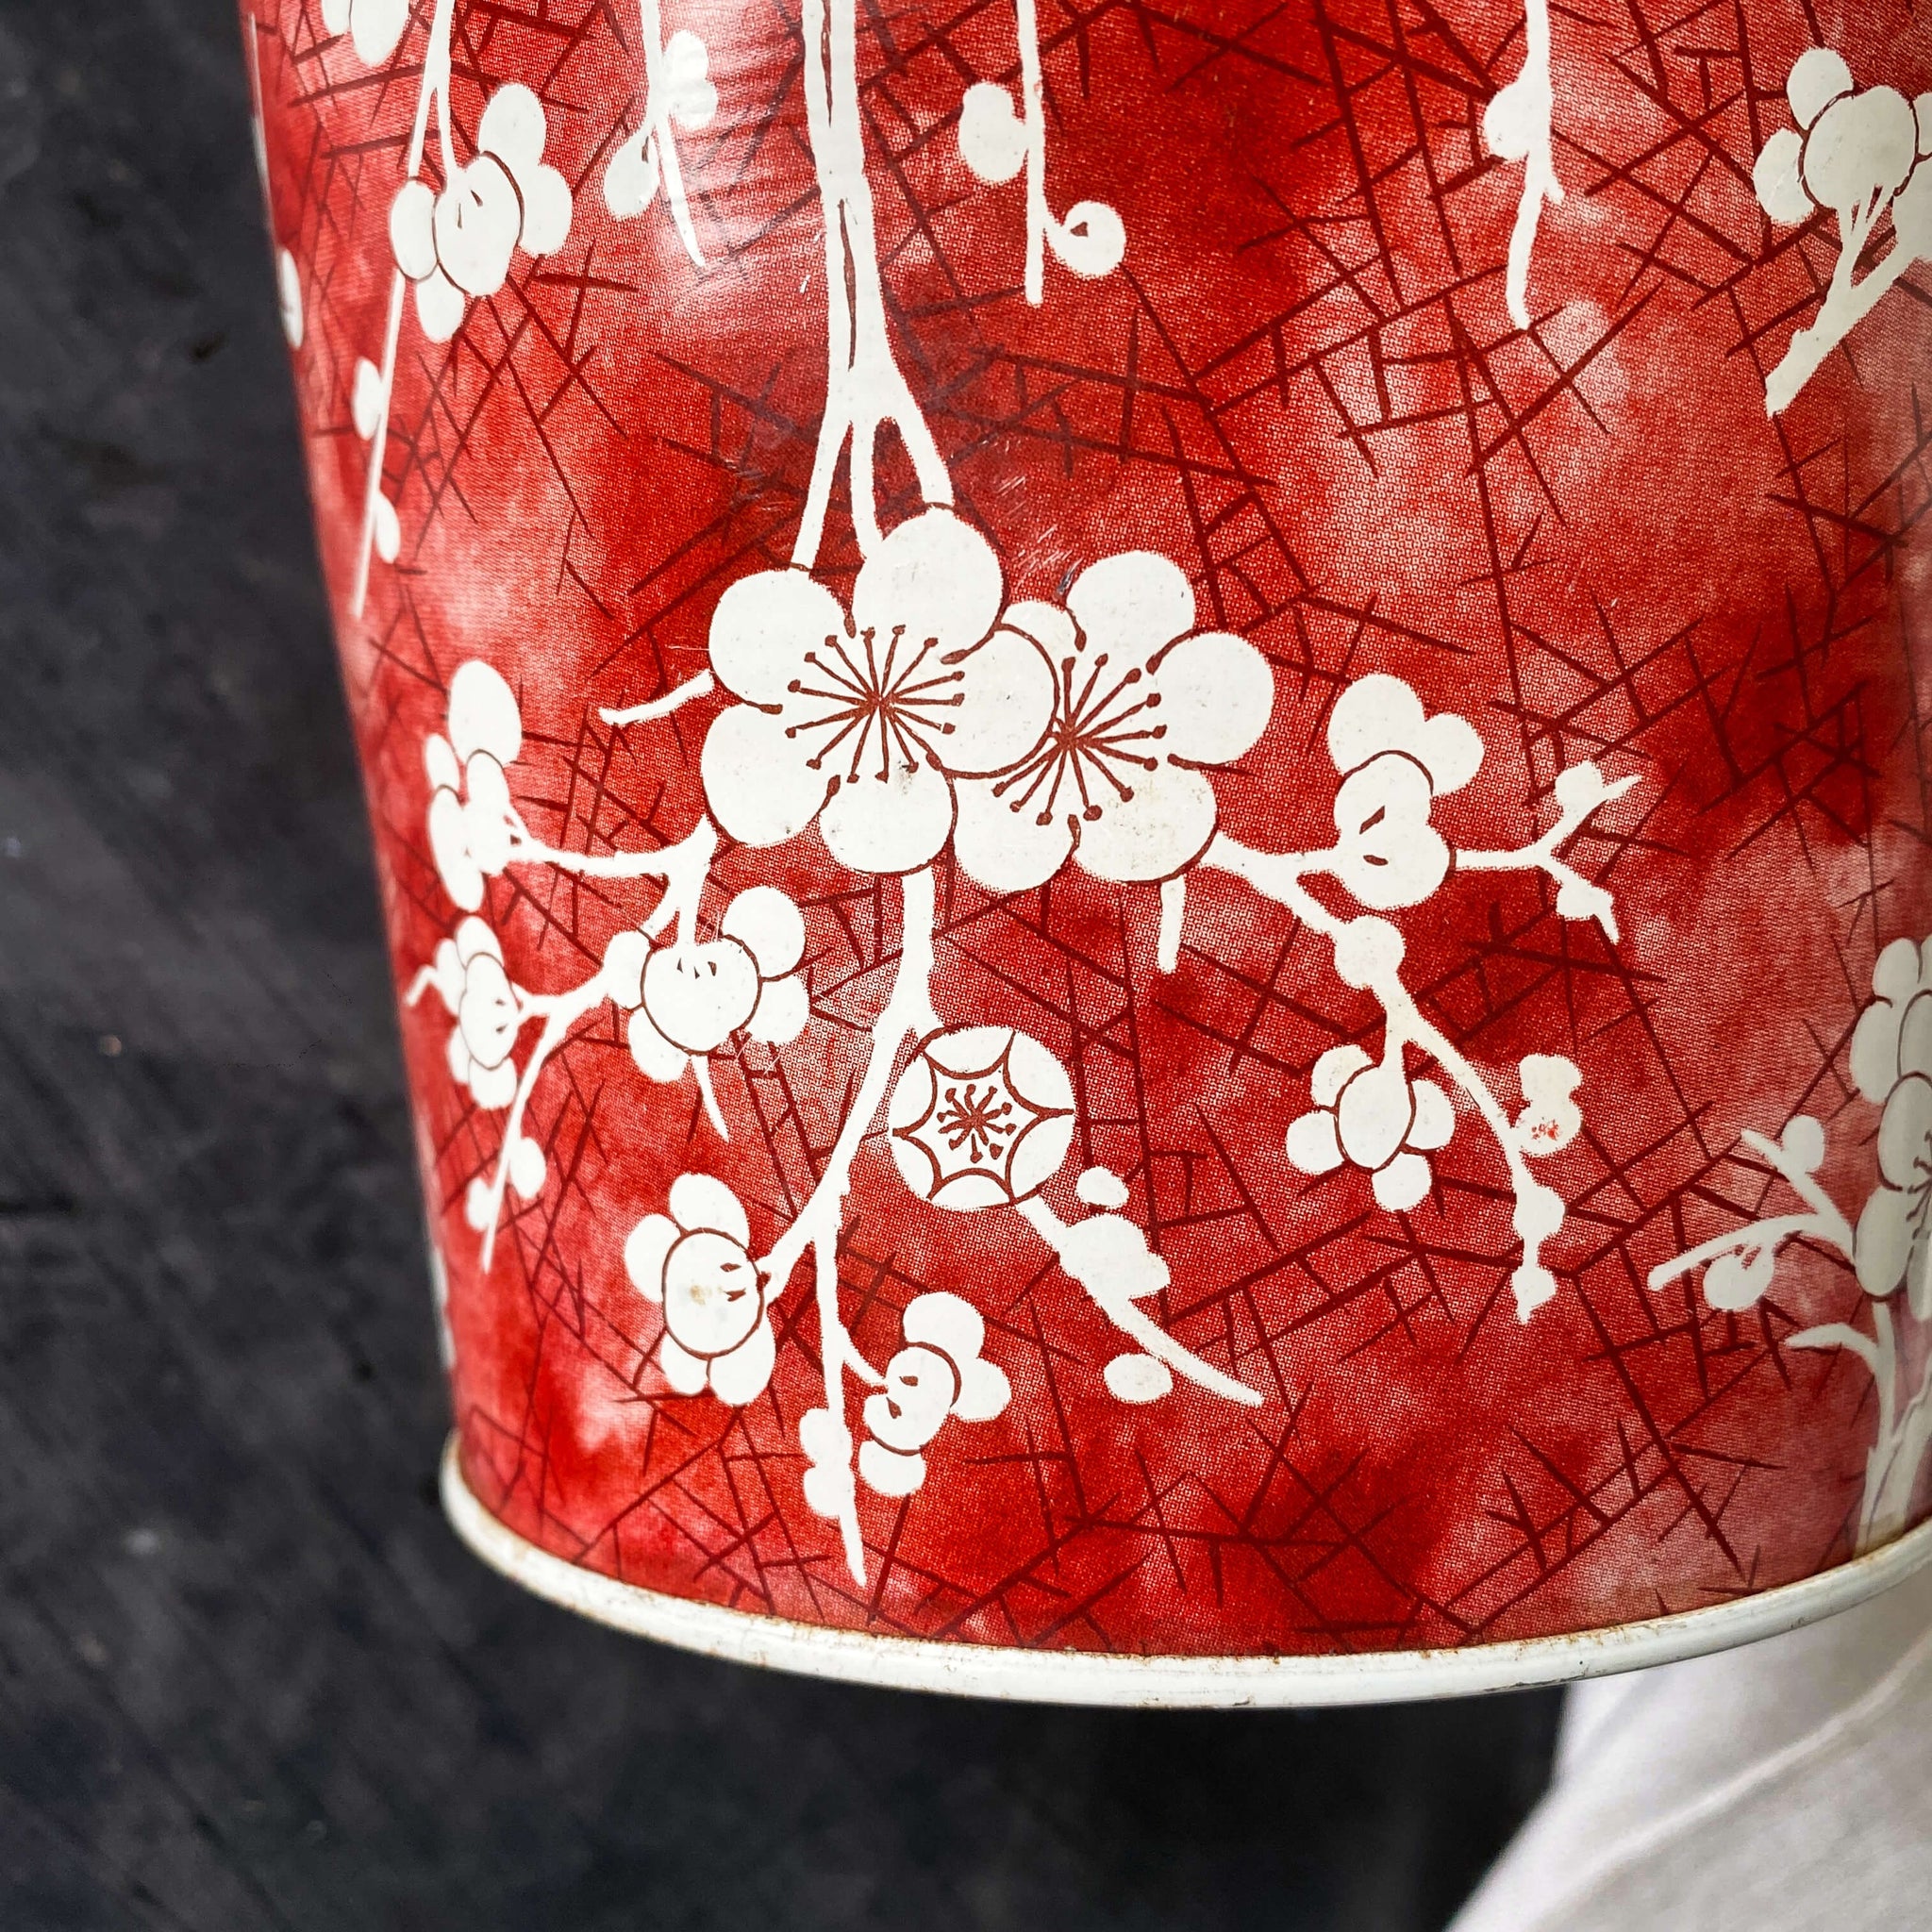 Vintage Daher Tin - Red and White Cherry Blossoms